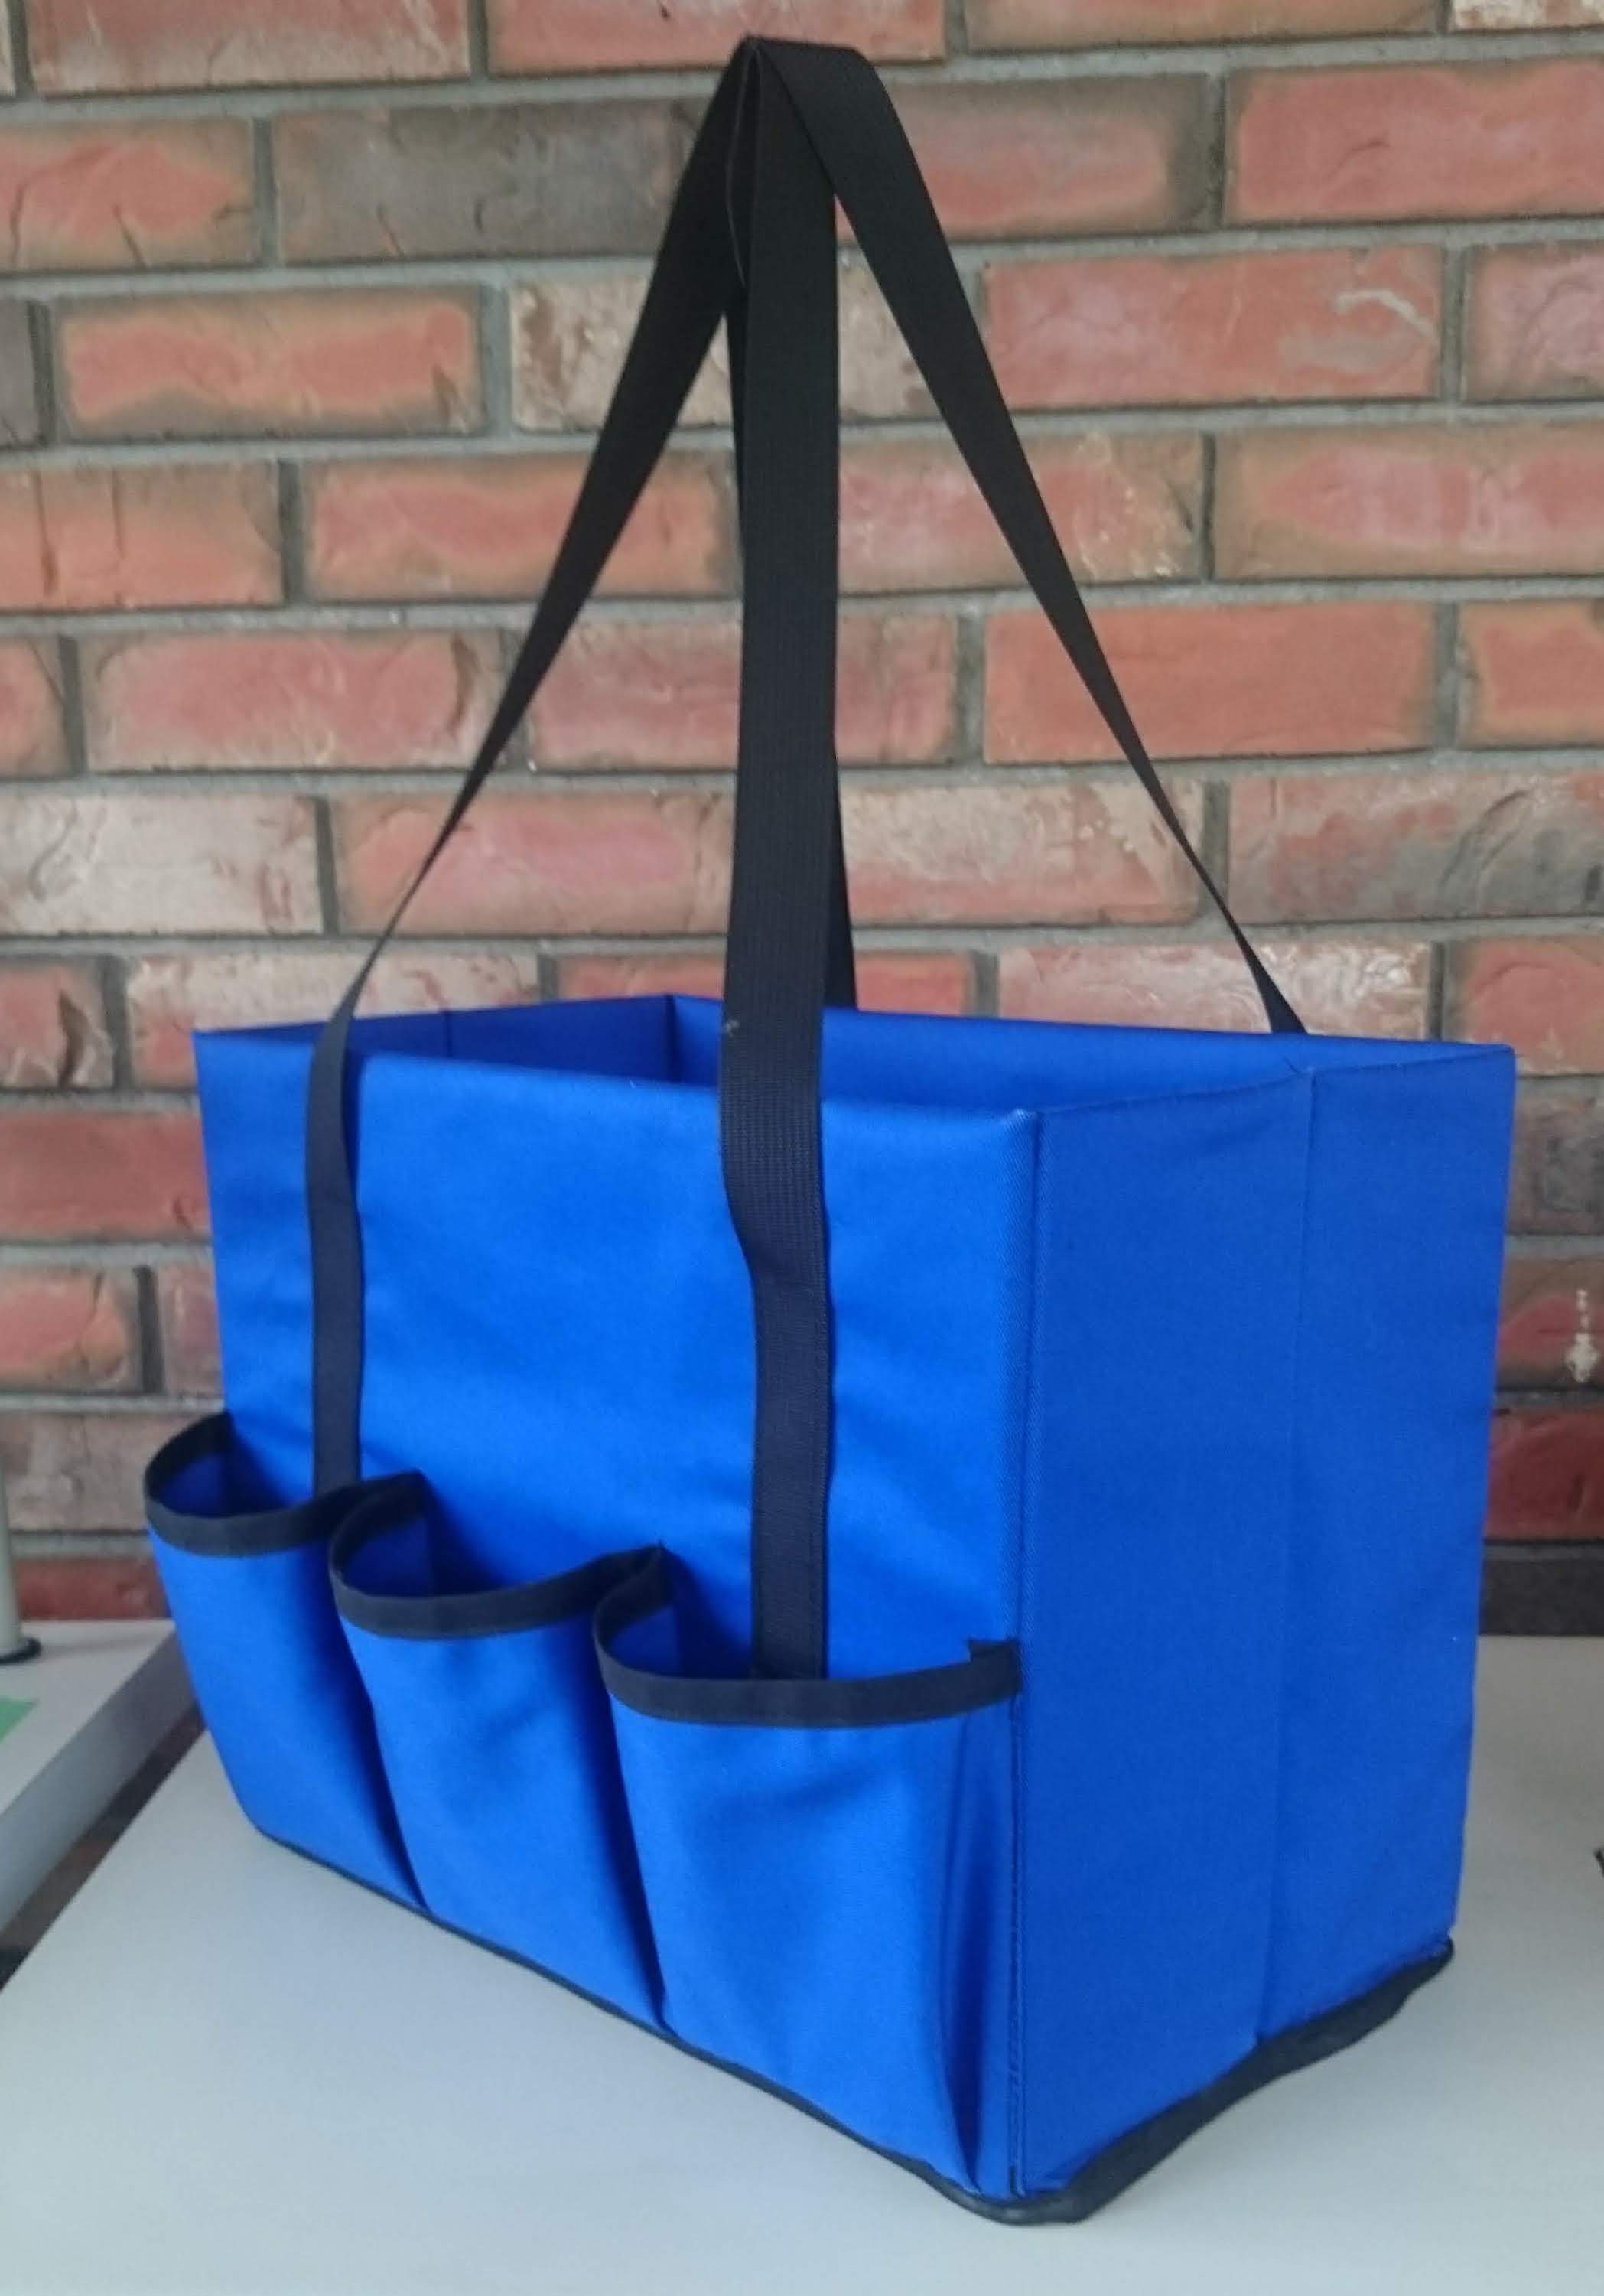 Made in Canada Box tote tool bag